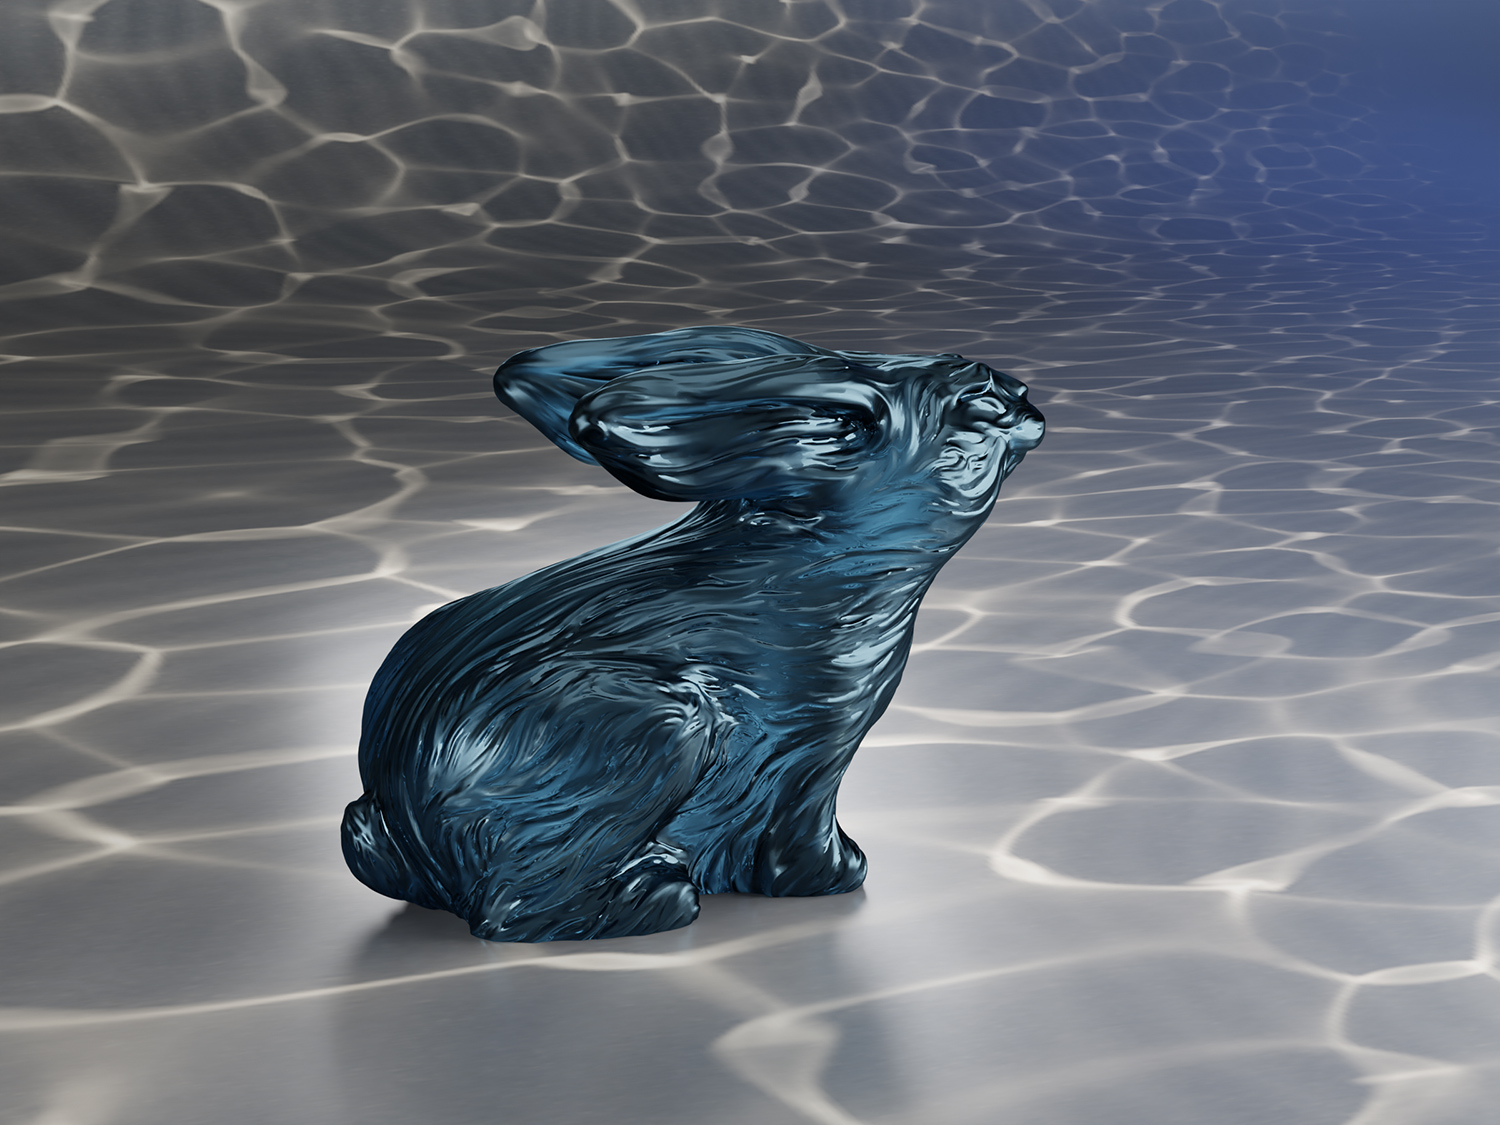 Concept Sculpture of the Water Rabbit, Mystical Character Design. Realistic 3D Rendering.